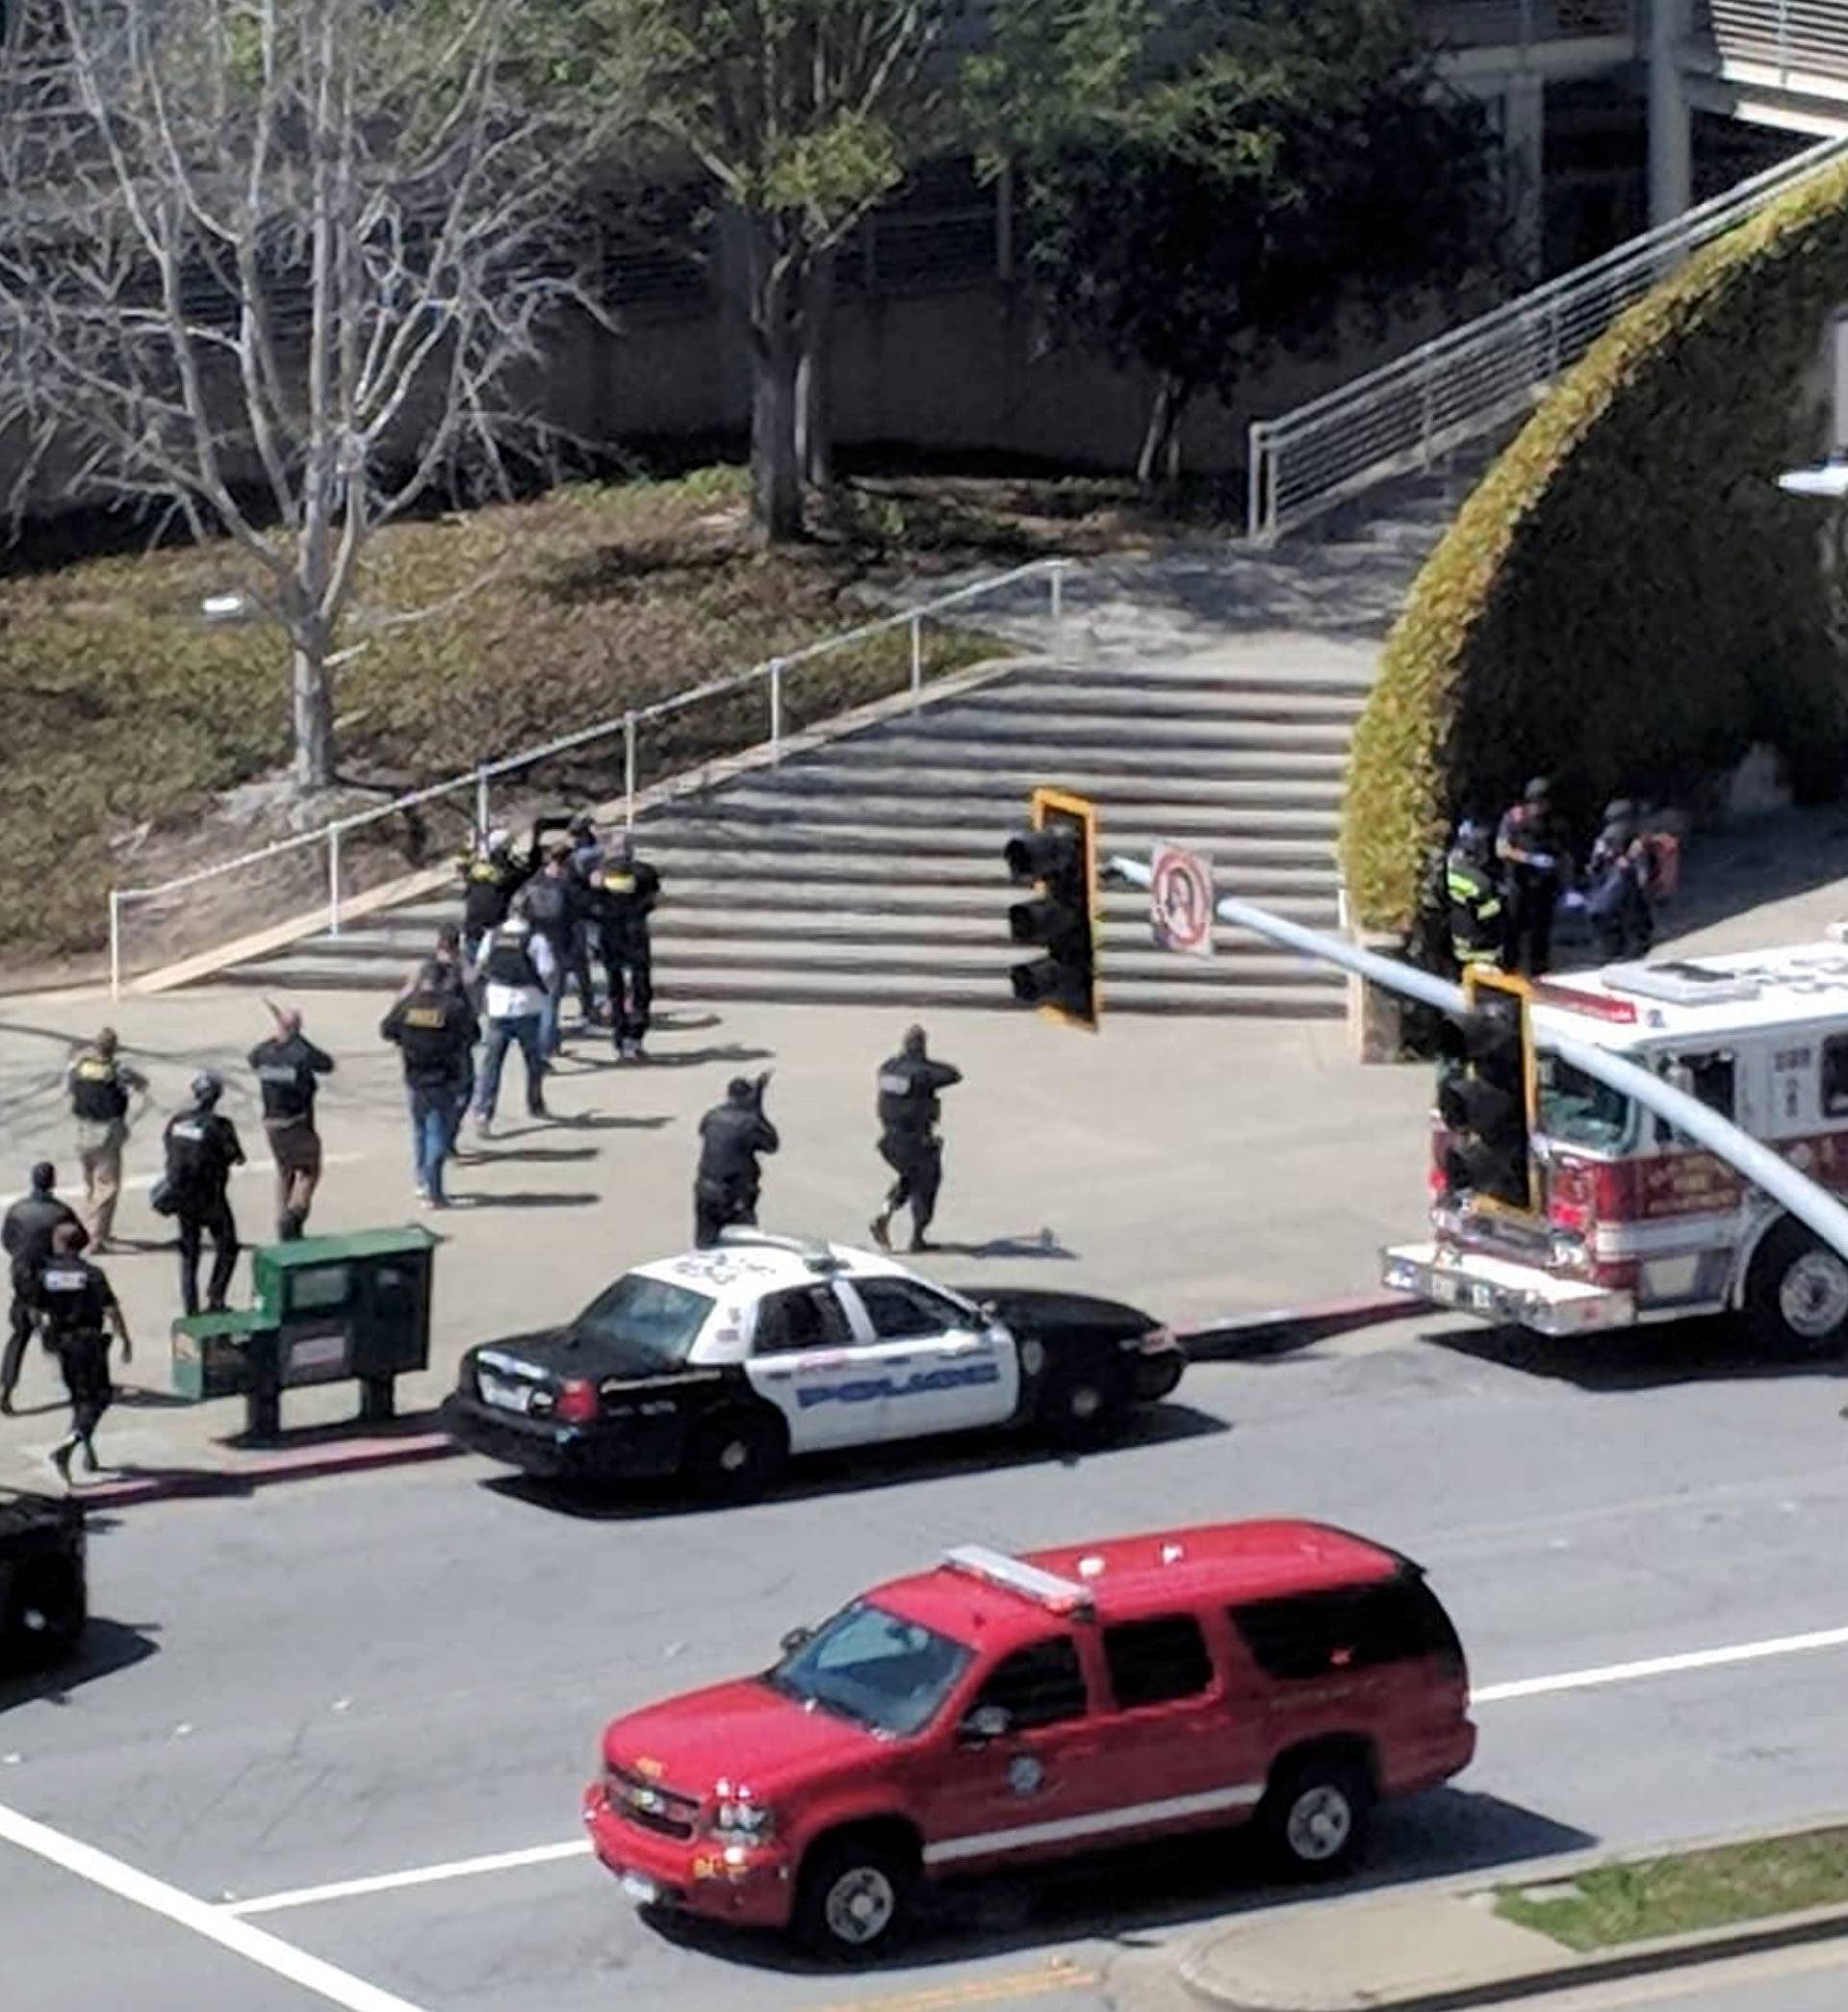 The scenes following a possible shooting at the headquarters of YouTube in San Bruno, California